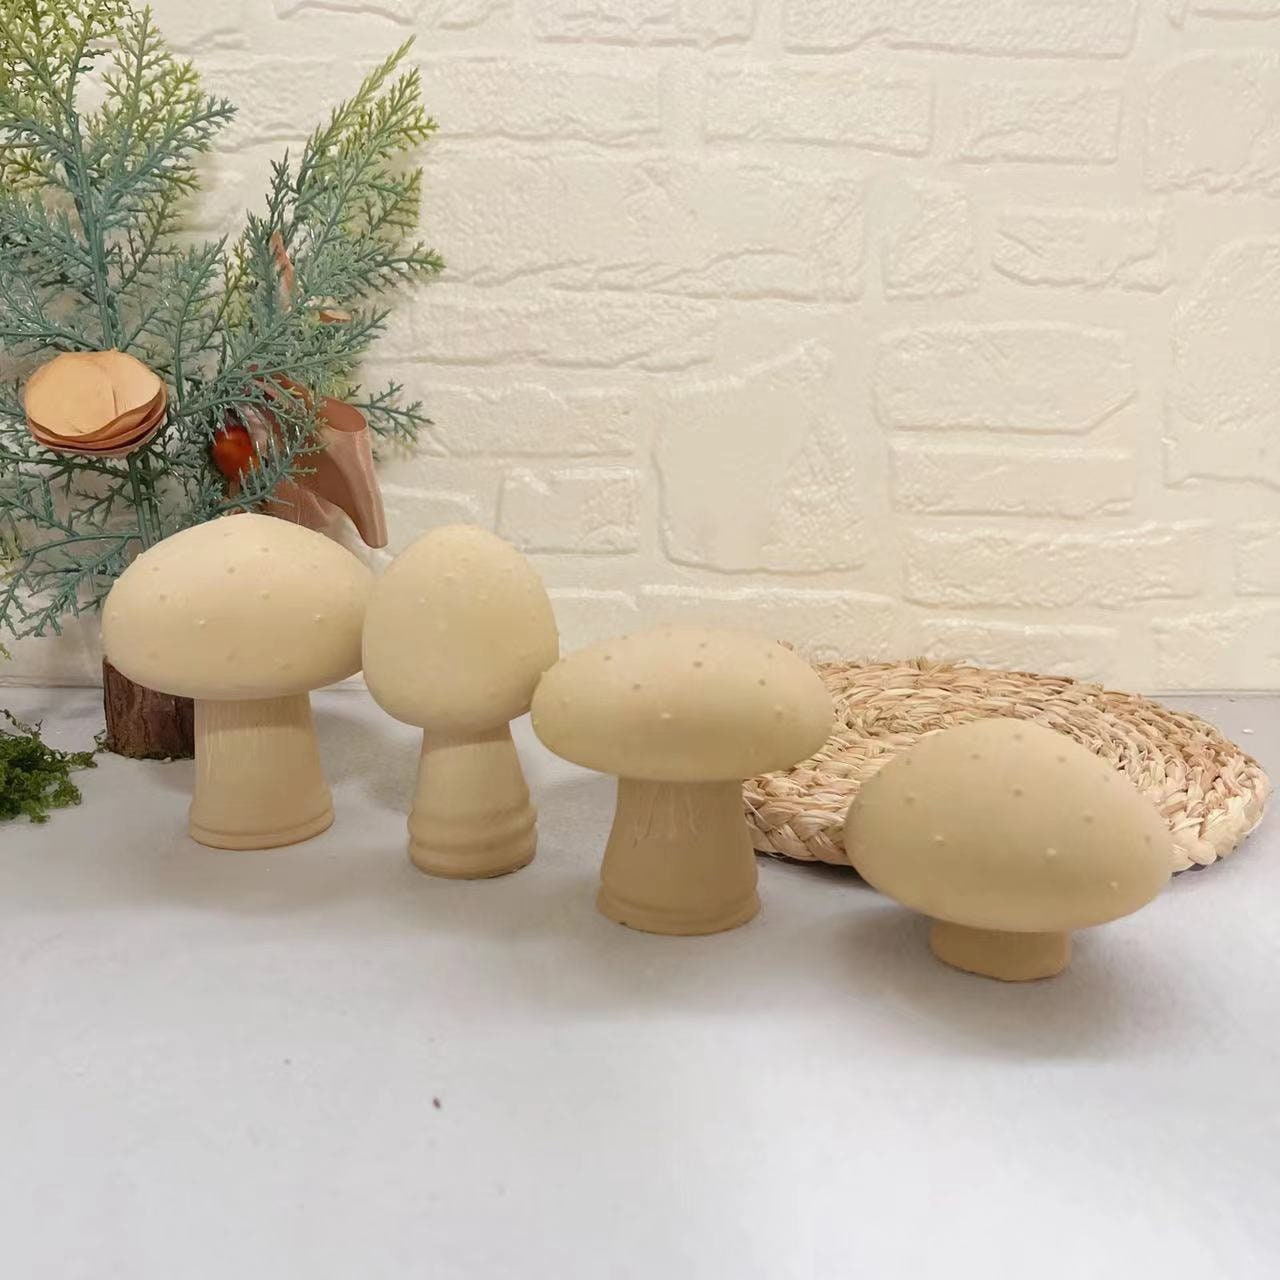 New Ins Silicone Mushroom Candle Mold 9types of Aromatherapy Children's  Educational Resin Mold DIY Painted Plaster Mold Toy Home Decoration 